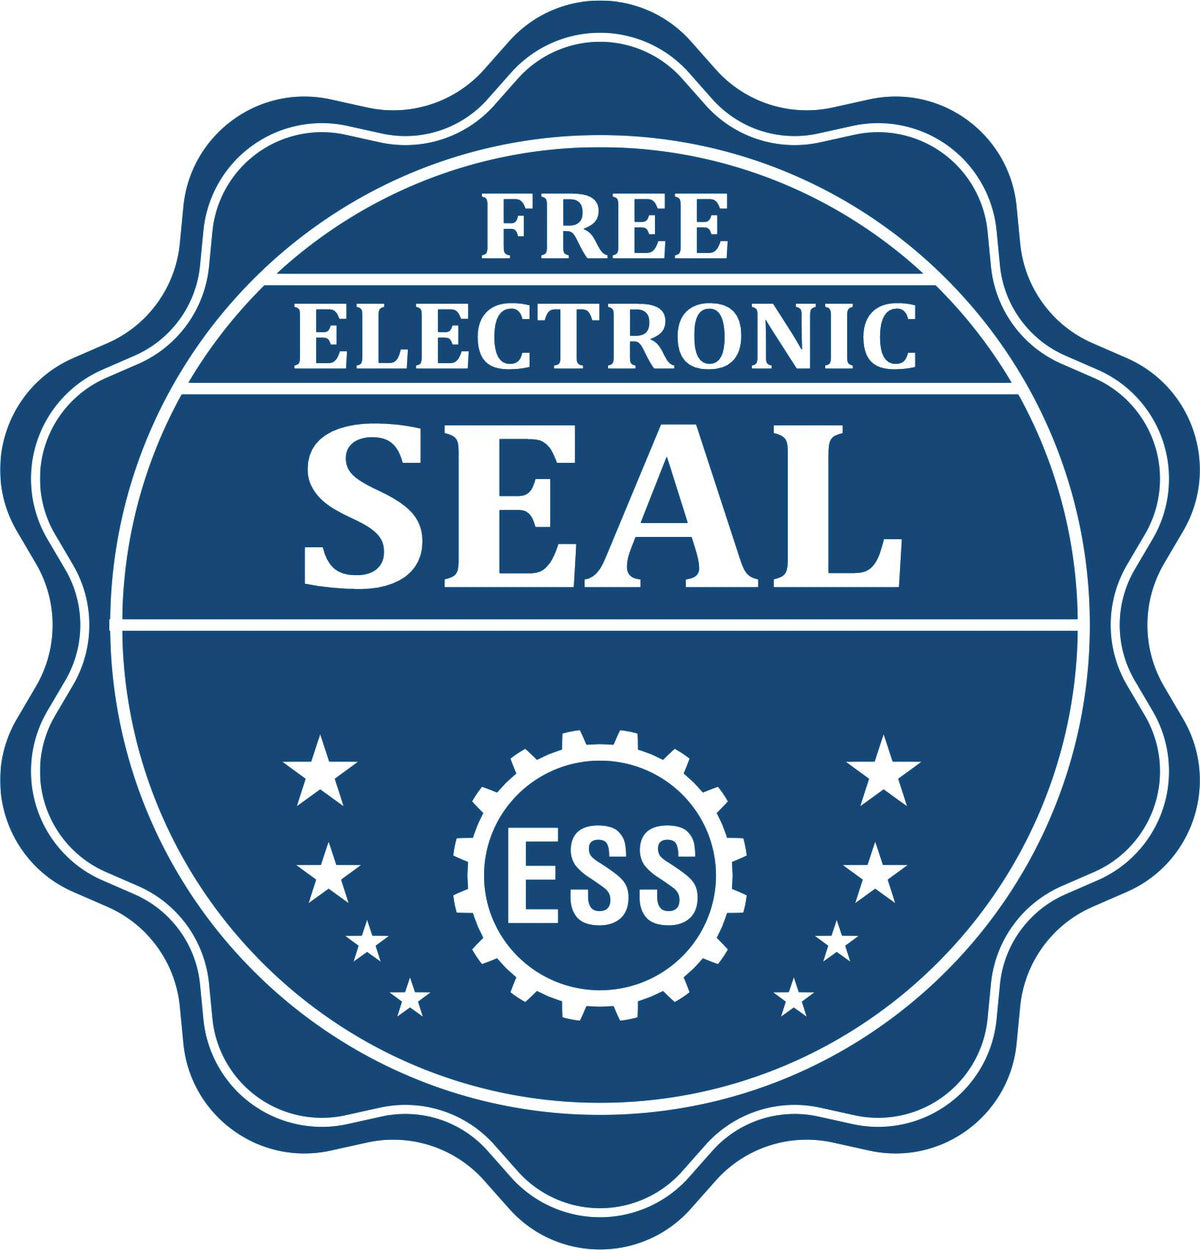 A badge showing a free electronic seal for the Long Reach Texas Geology Seal with stars and the ESS gear on the emblem.